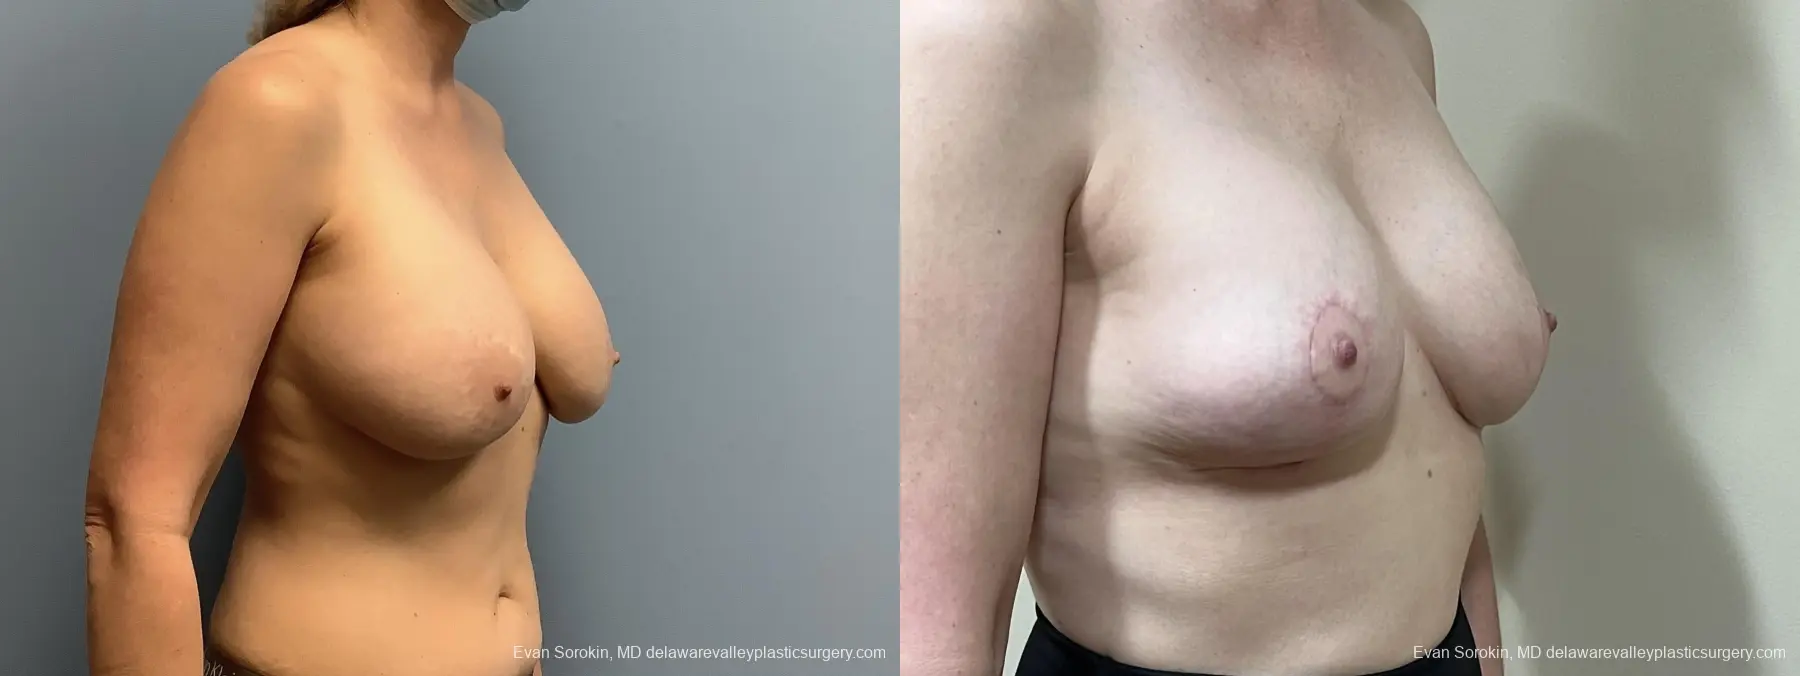 Breast Lift And Augmentation: Patient 50 - Before and After 2